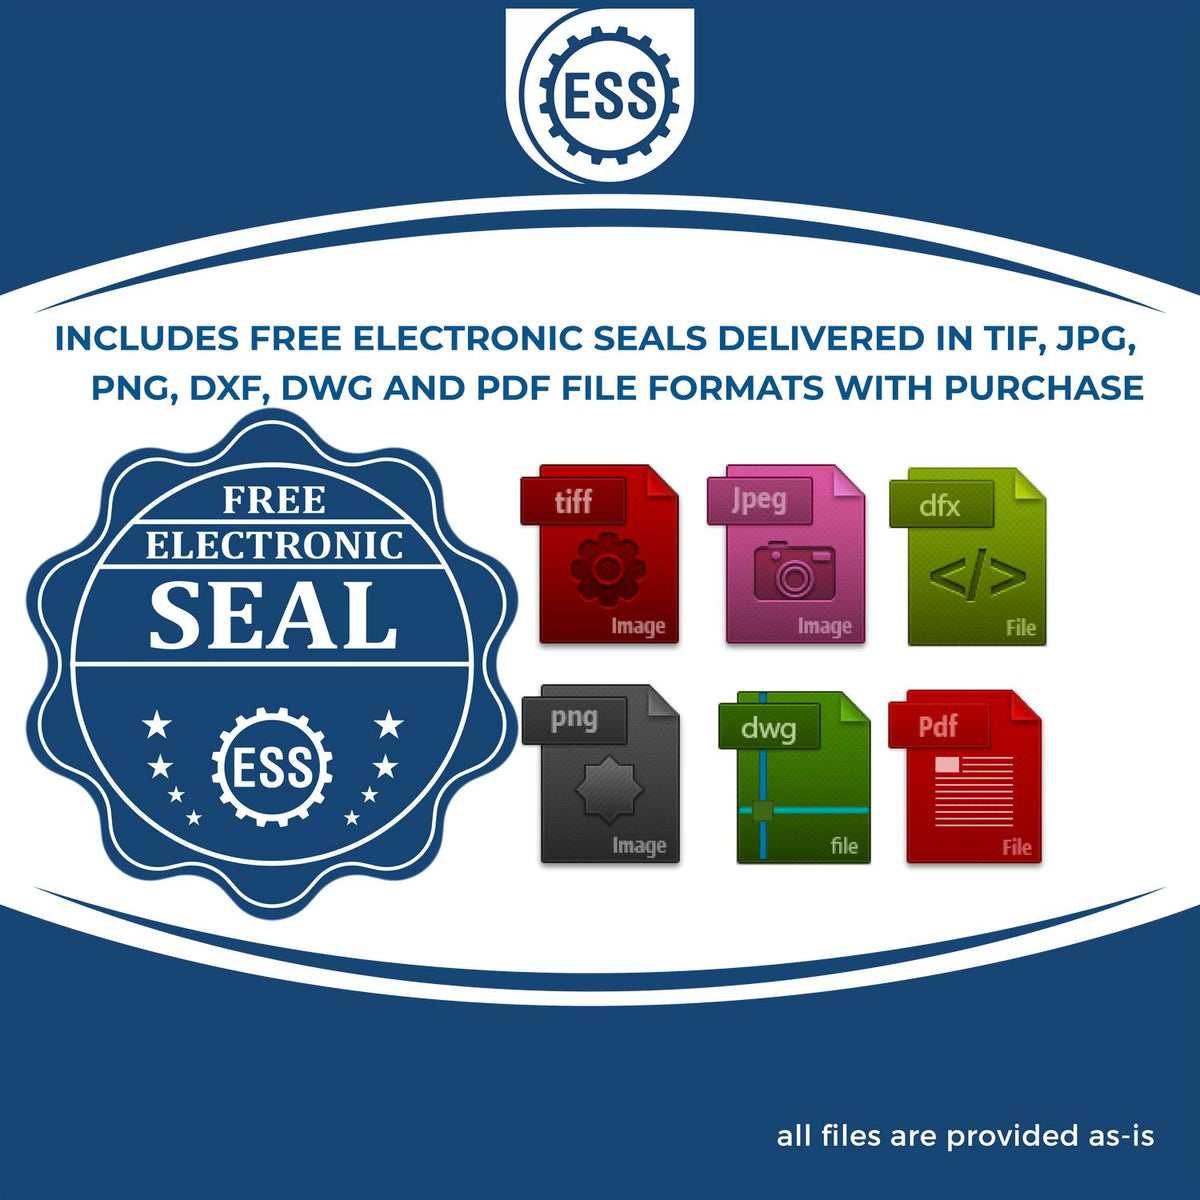 An infographic for the free electronic seal for the Heavy Duty Cast Iron Nevada Architect Embosser illustrating the different file type icons such as DXF, DWG, TIF, JPG and PNG.